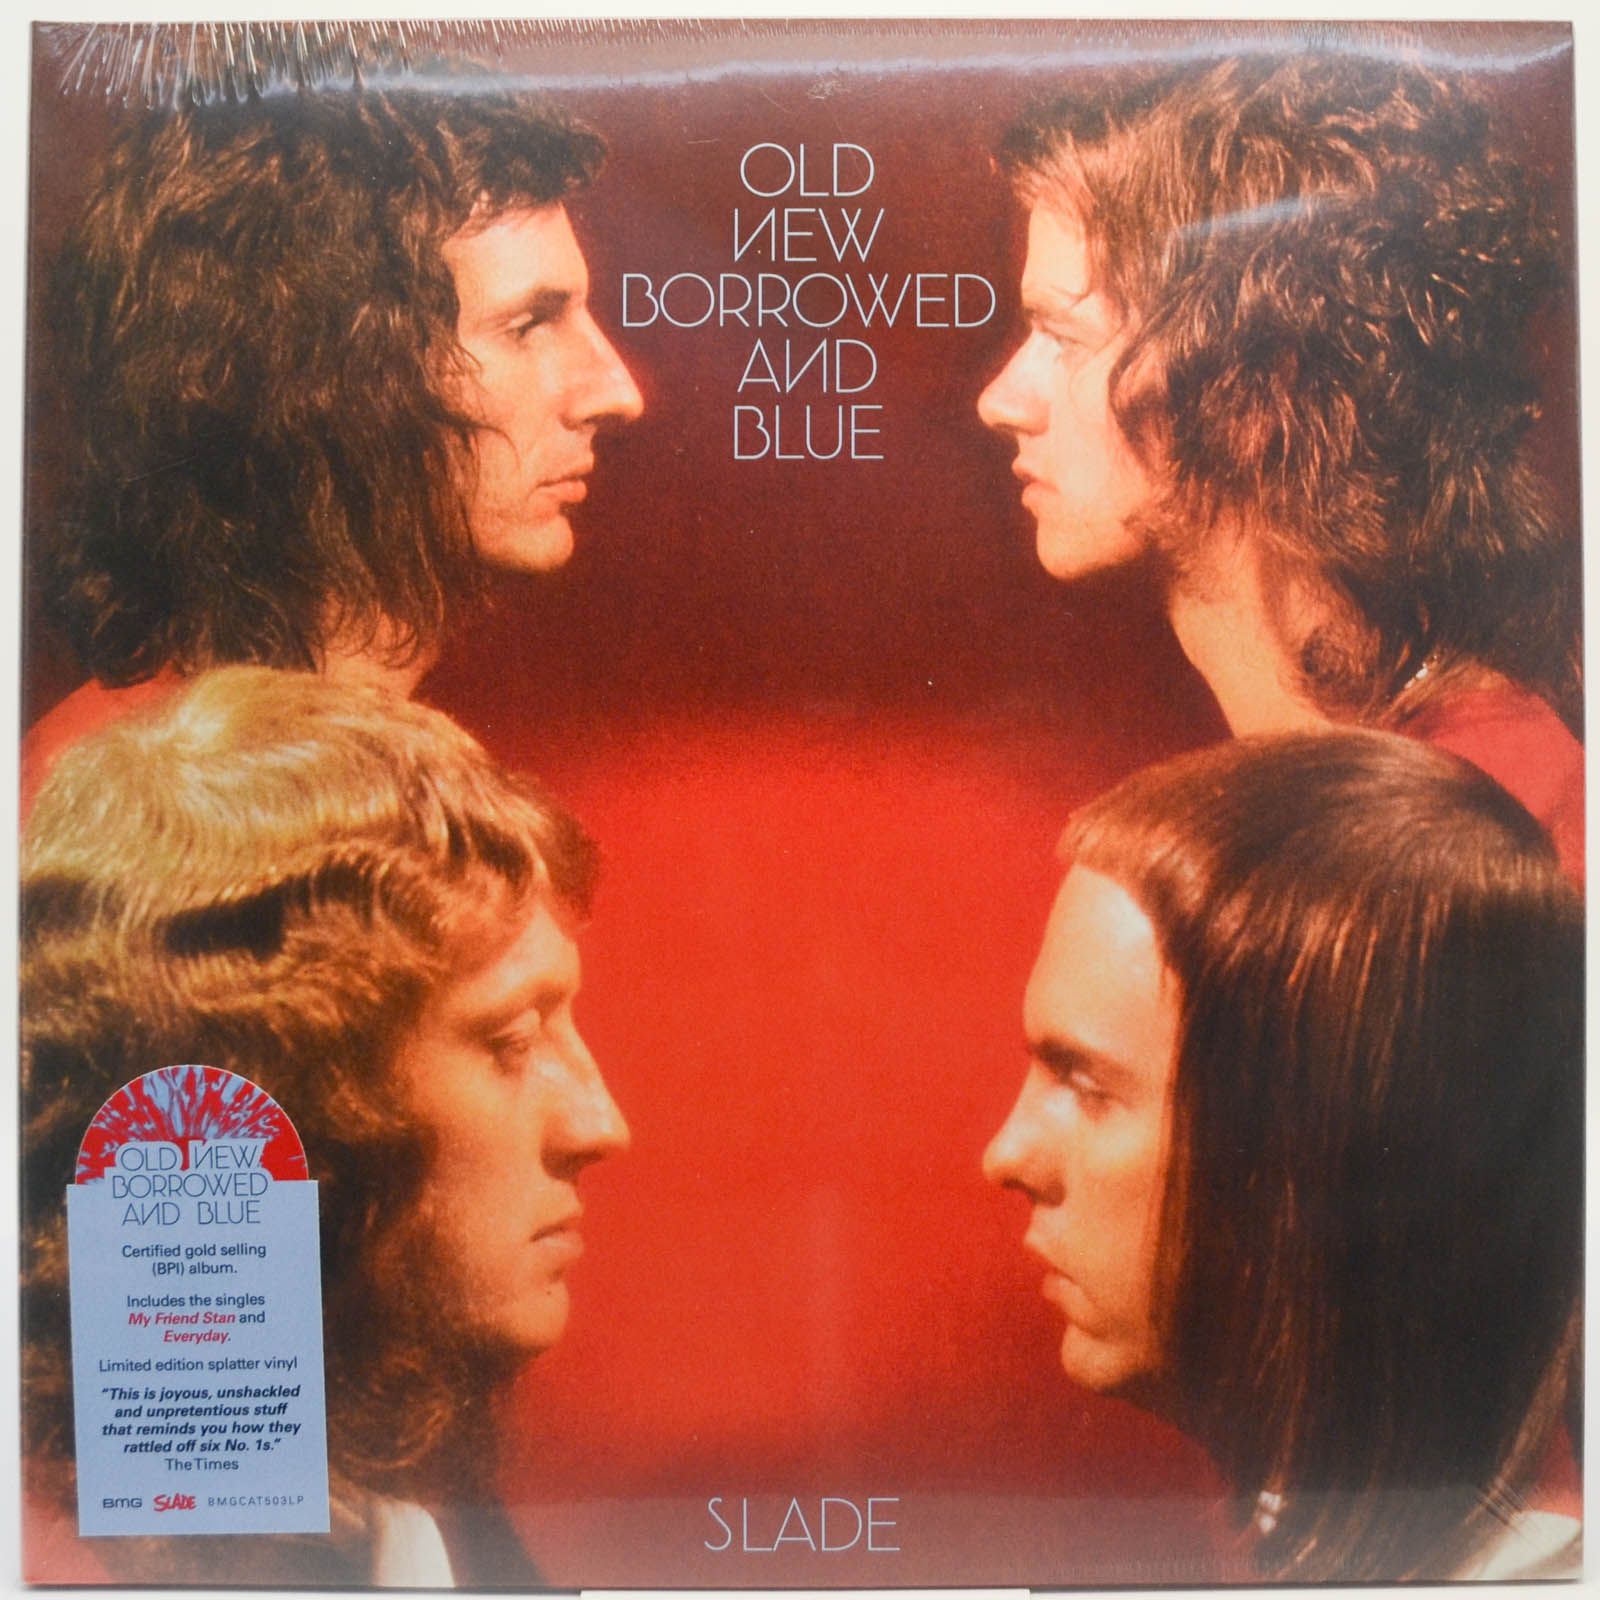 Slade — Old New Borrowed And Blue, 1974